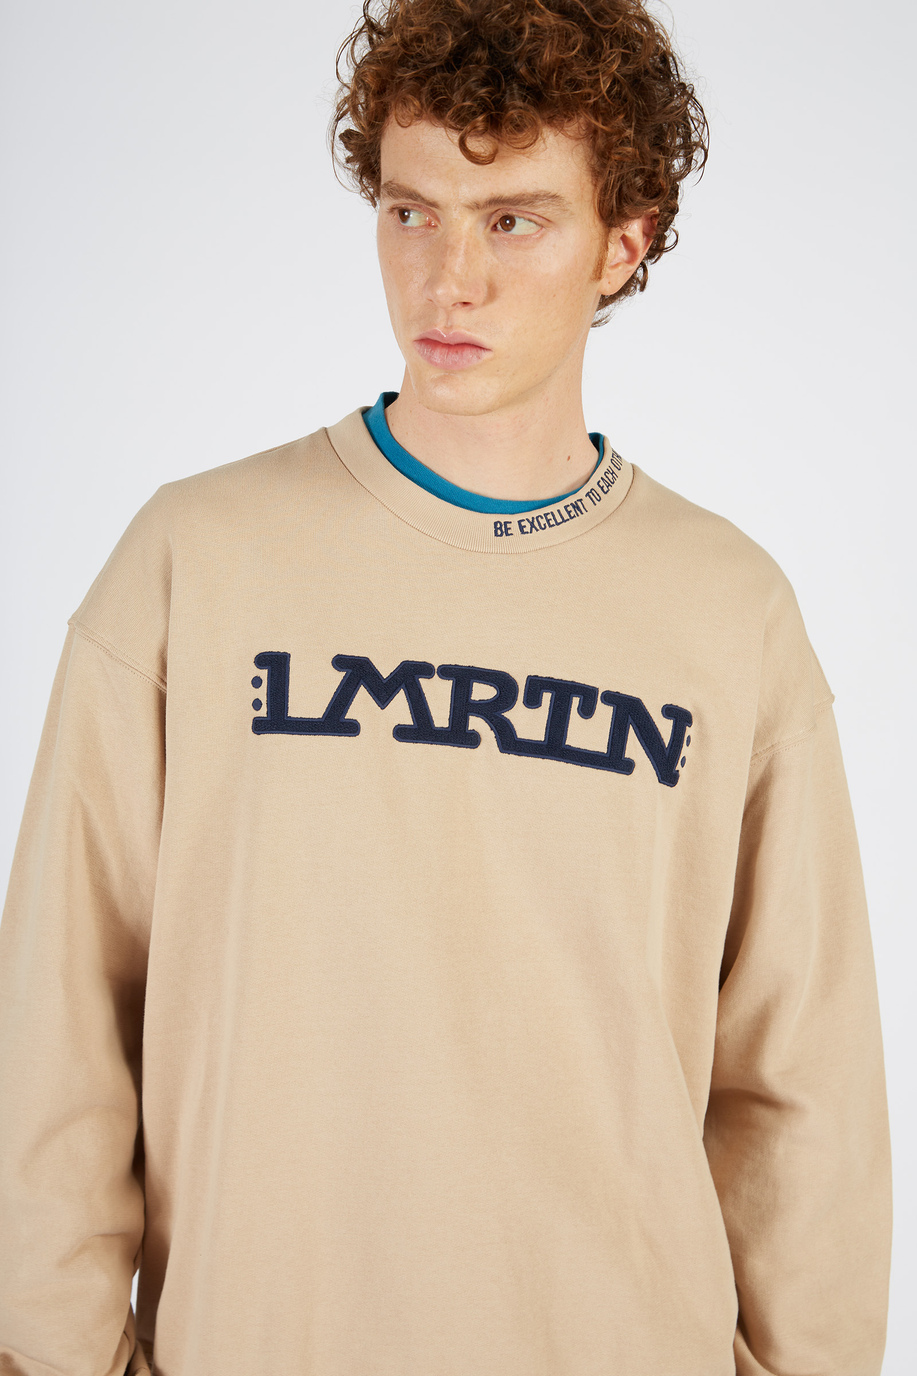 Men's sweatshirt in 100% cotton with long sleeves, oversized fit